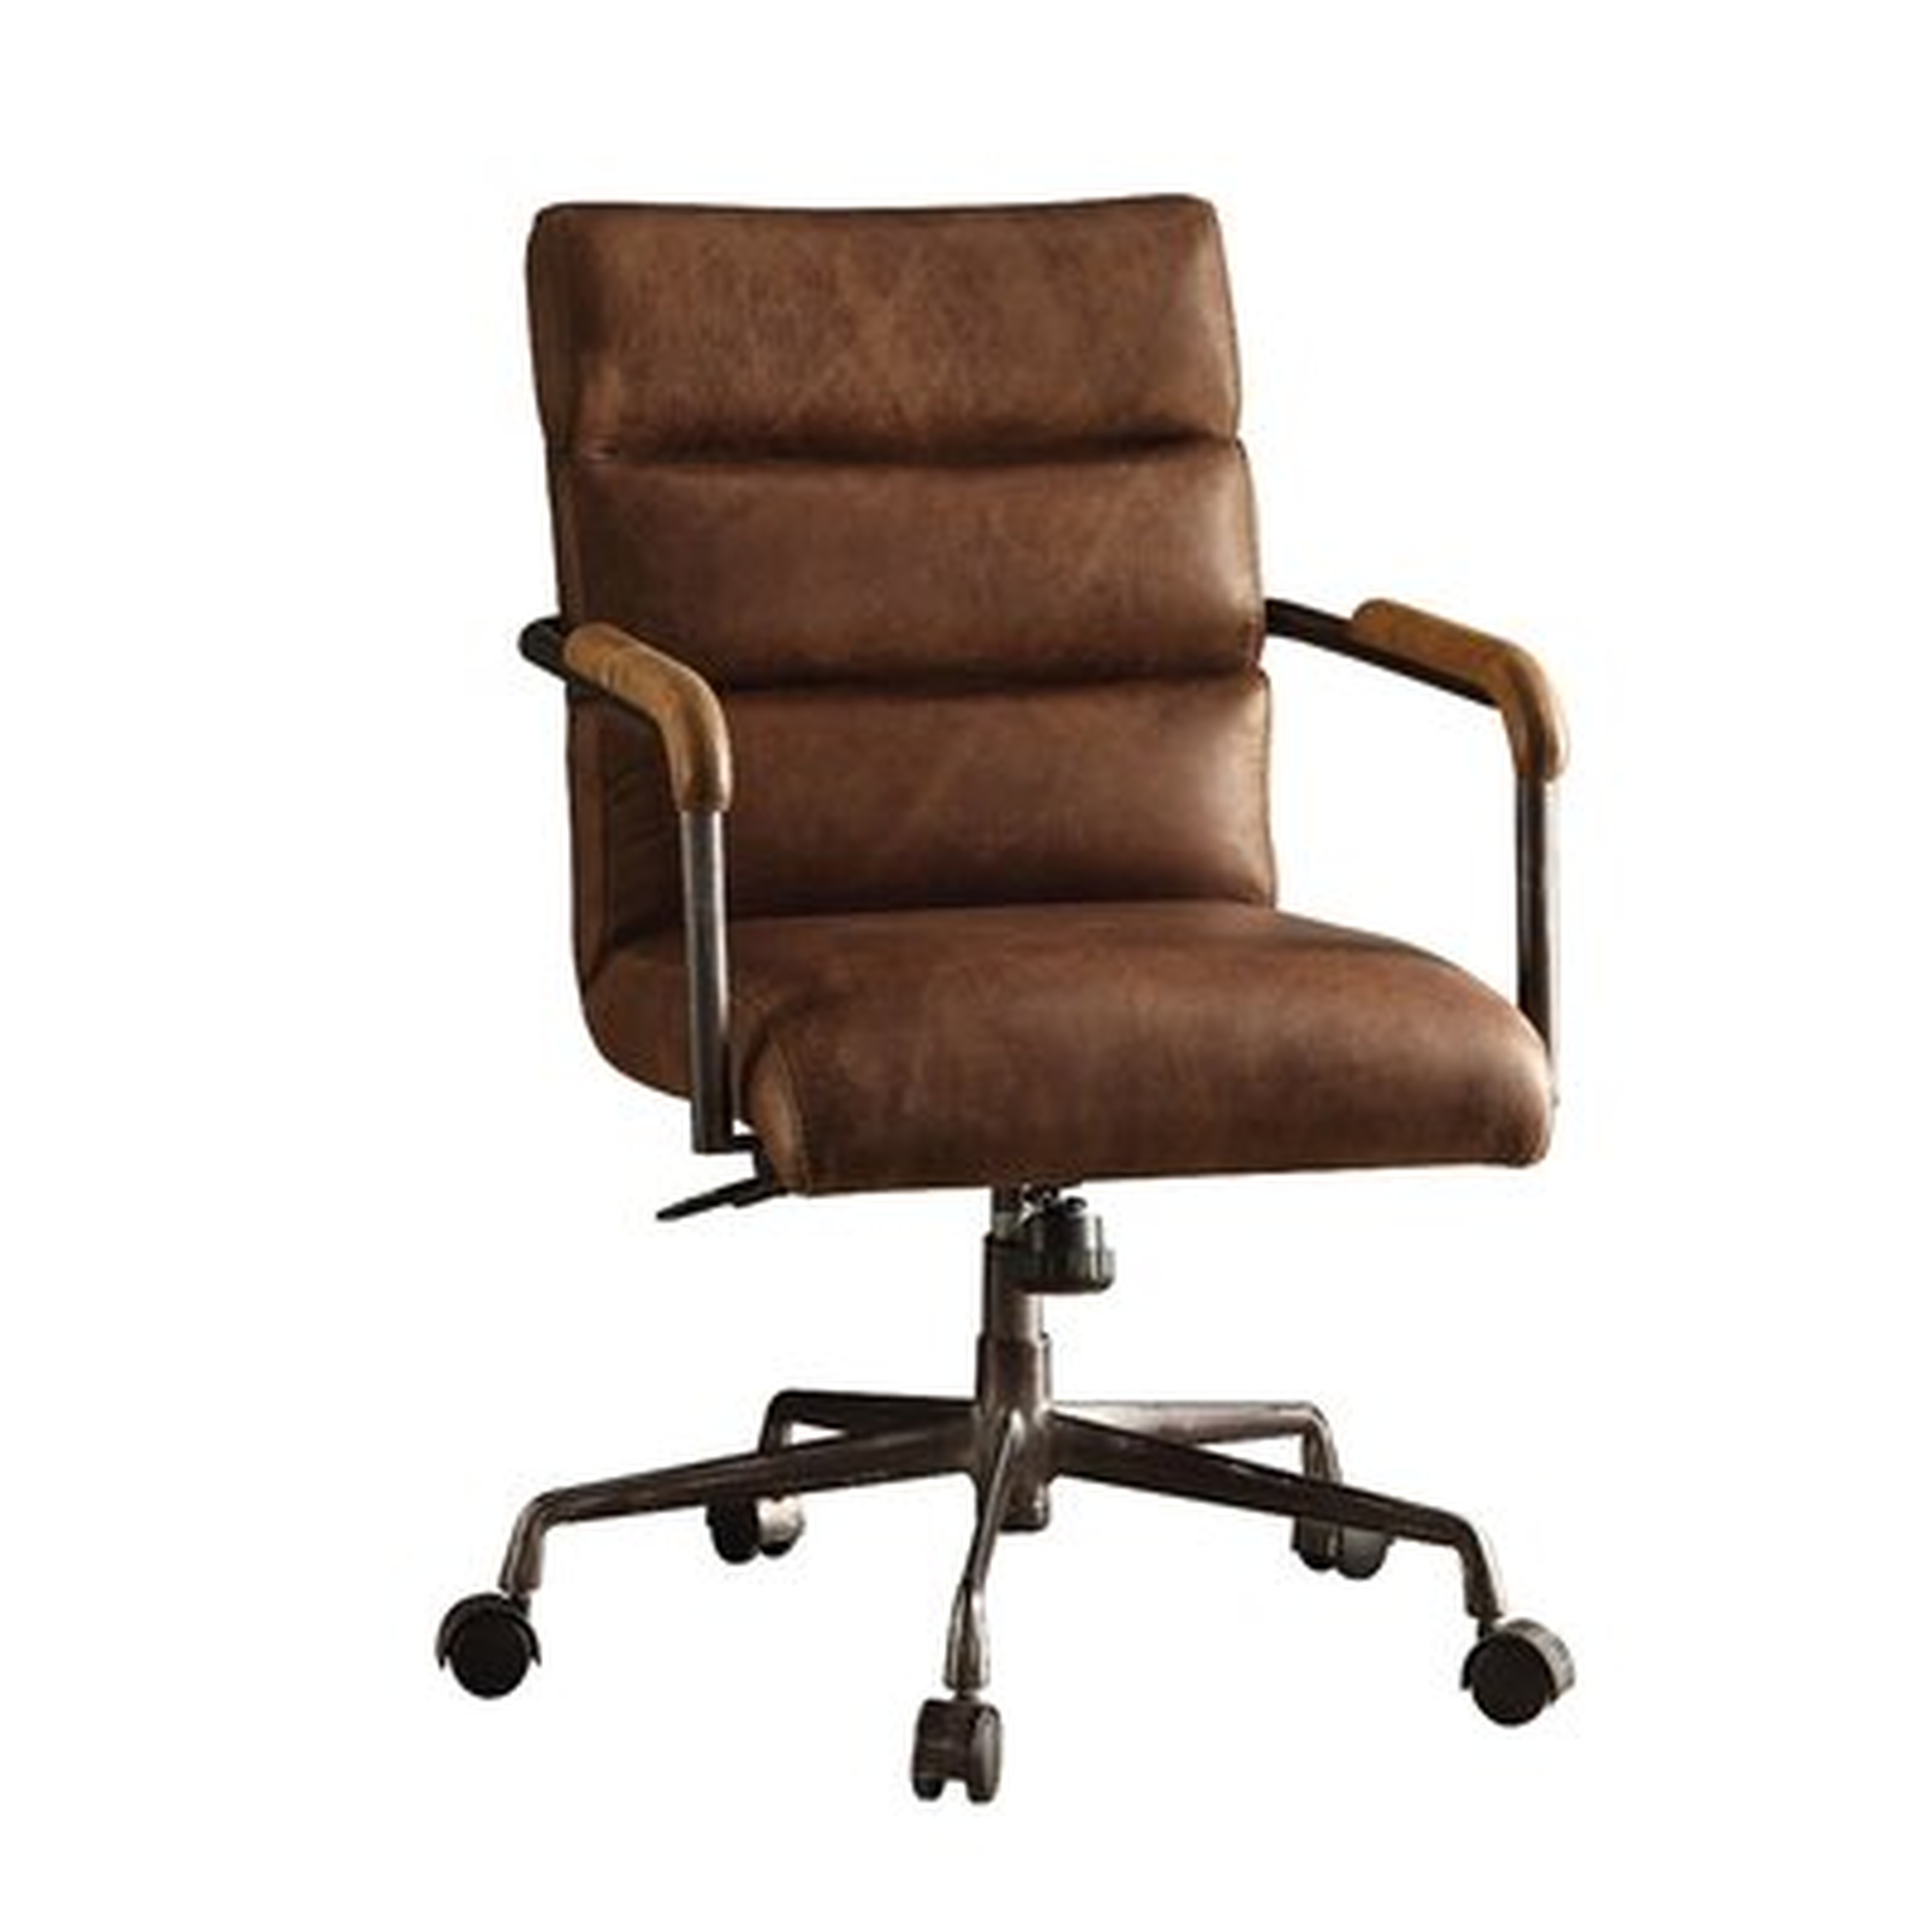 Brancaster Genuine Leather Conference Chair - Birch Lane